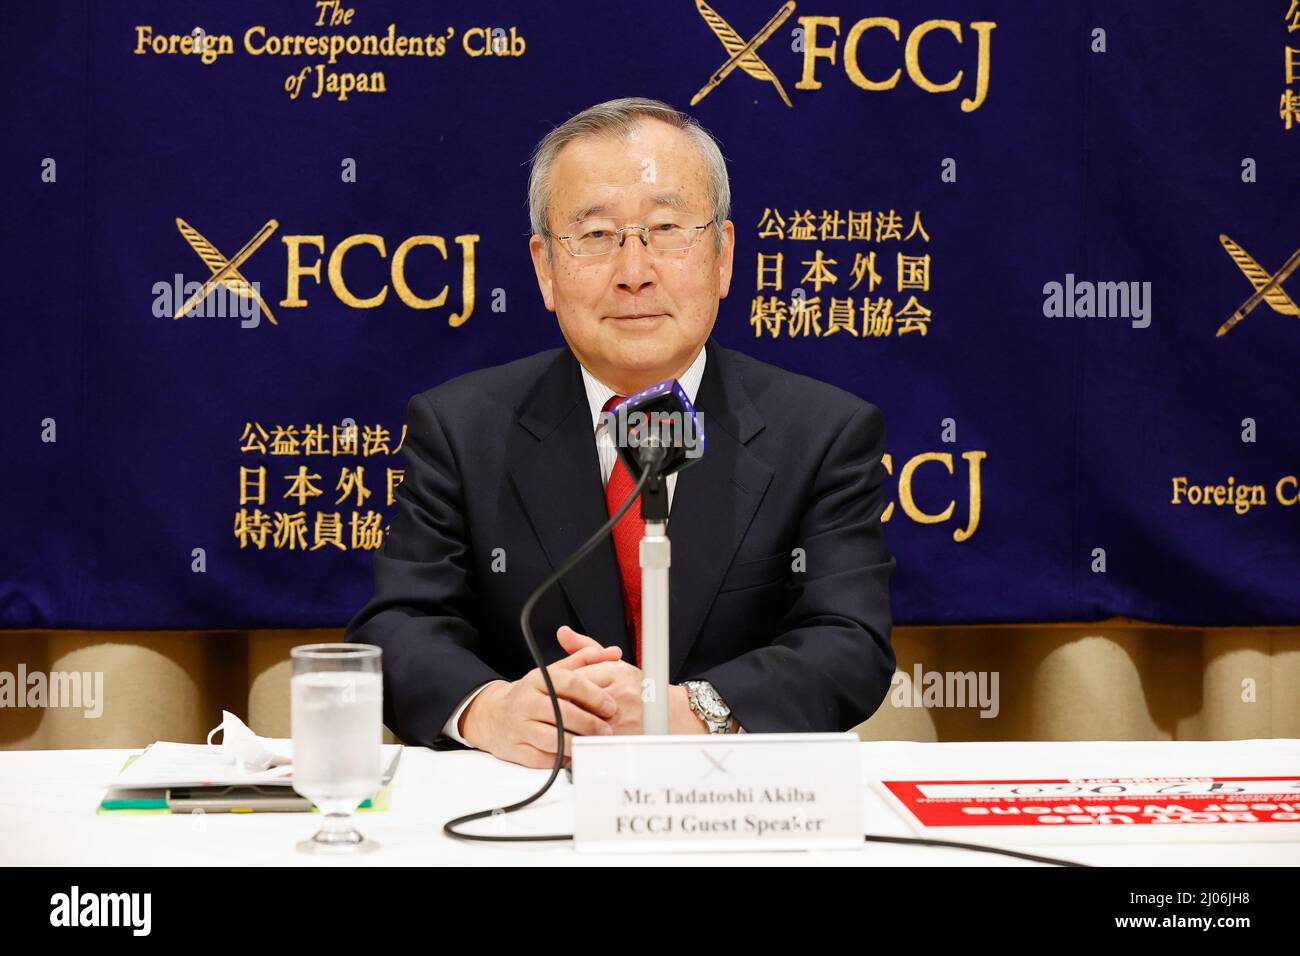 Tokyo, Japan. 17th Mar, 2022. Tadatoshi Akiba Former Mayor of Hiroshima City attends a news conference at The Foreign Correspondents' Club of Japan. Akiba sent a message to world leaders, including President Vladimir Putin to don't use nuclear weapons, over the Russia-Ukraine war continue. He visited the Club representing the voices of the Hibakusha (atomic bomb survivors) of Hiroshima and Nagasaki in 1945. (Credit Image: © Rodrigo Reyes Marin/ZUMA Press Wire) Credit: ZUMA Press, Inc./Alamy Live News Stock Photo